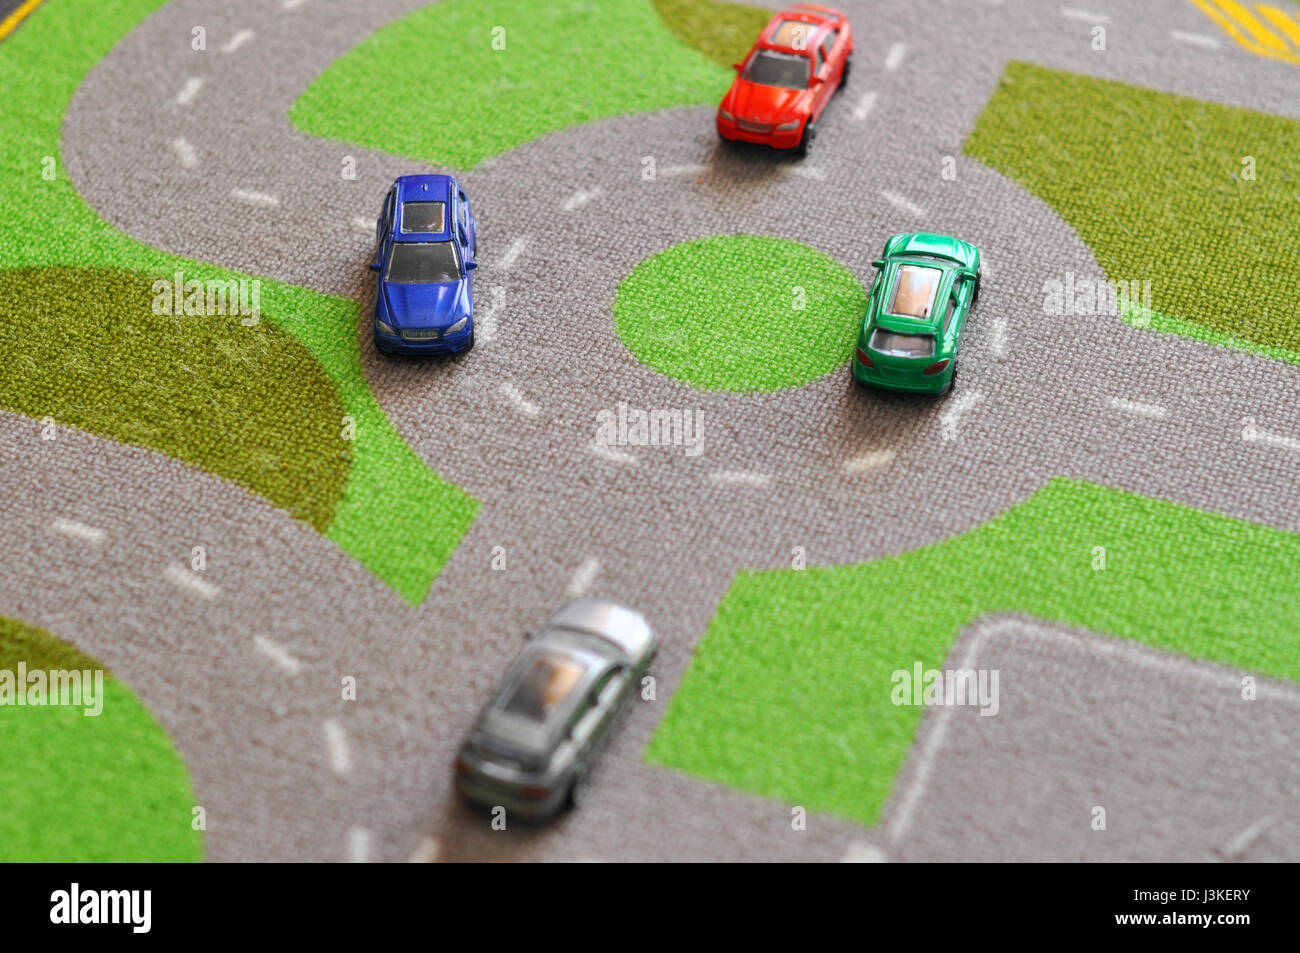 Toy cars over a carpet circuit Stock Photo